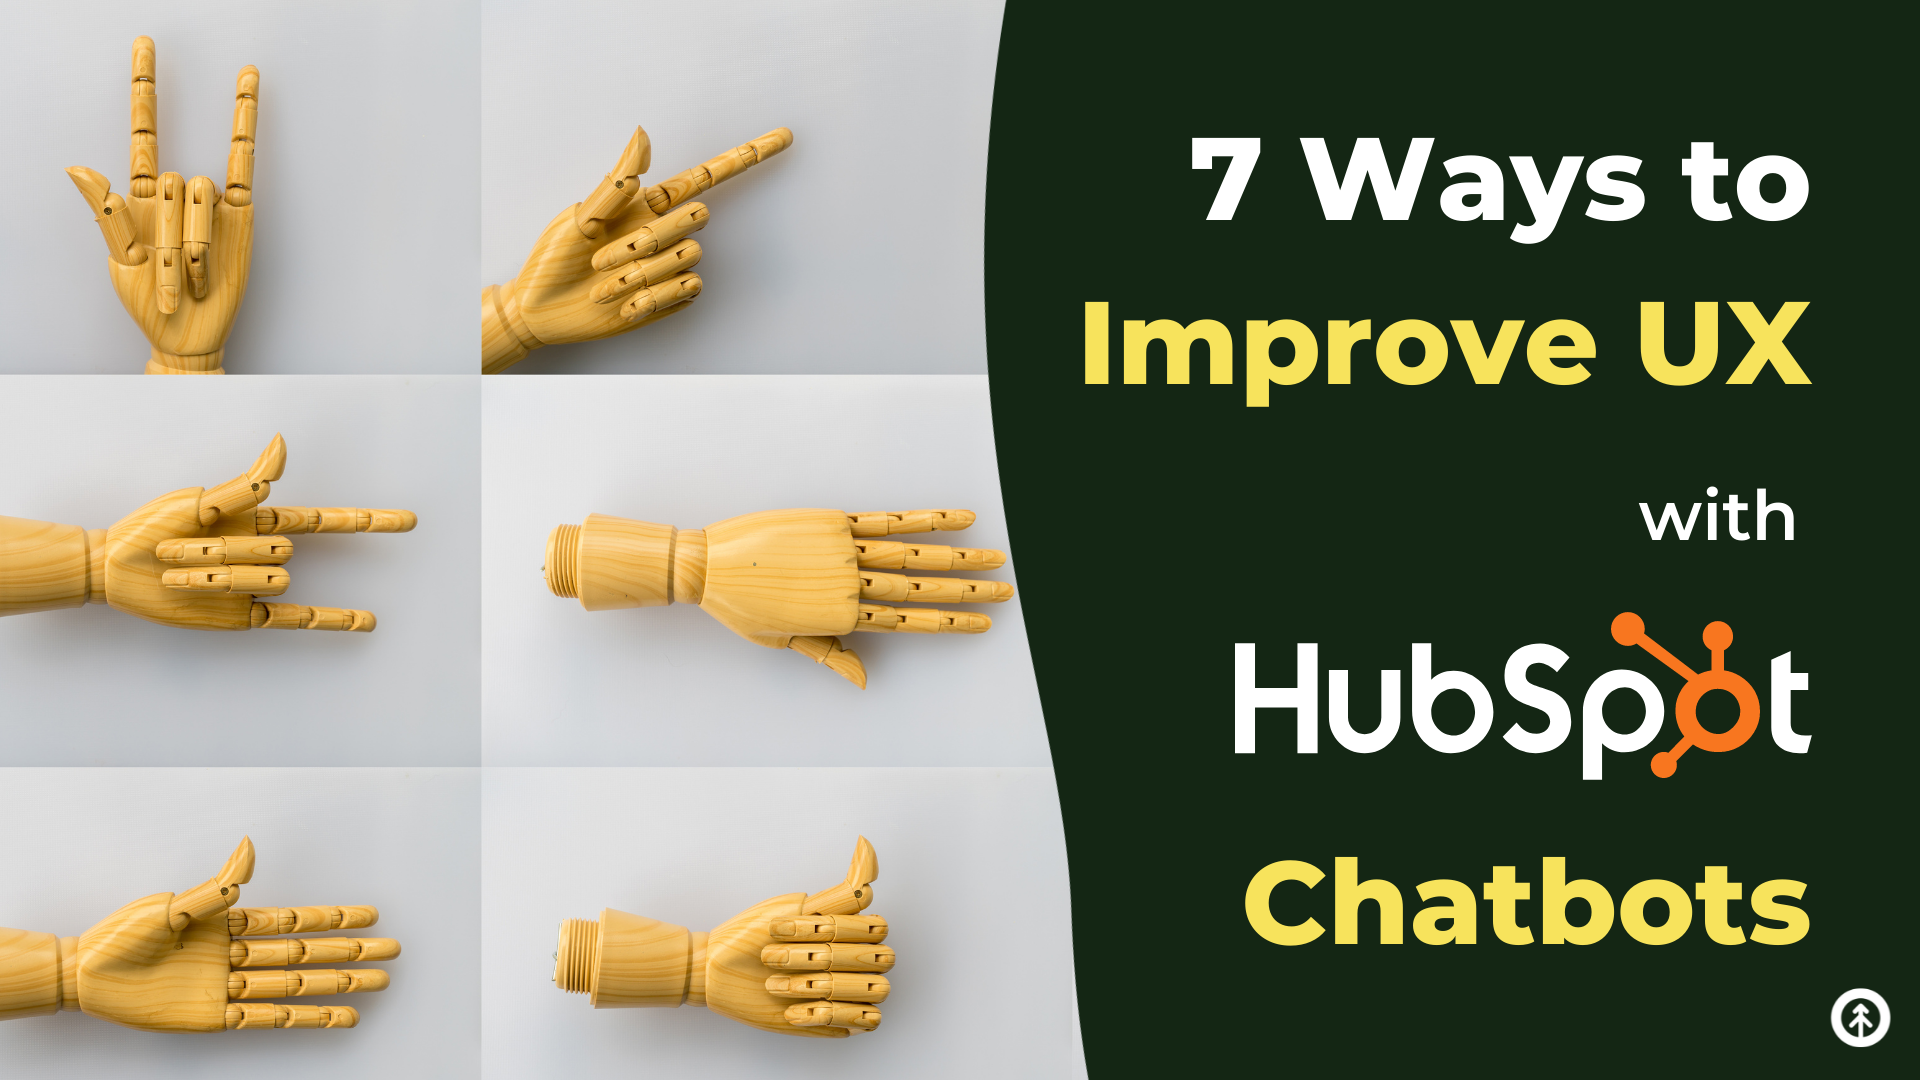 7 Ways to Improve UX with HubSpot Chatbots-featured-image